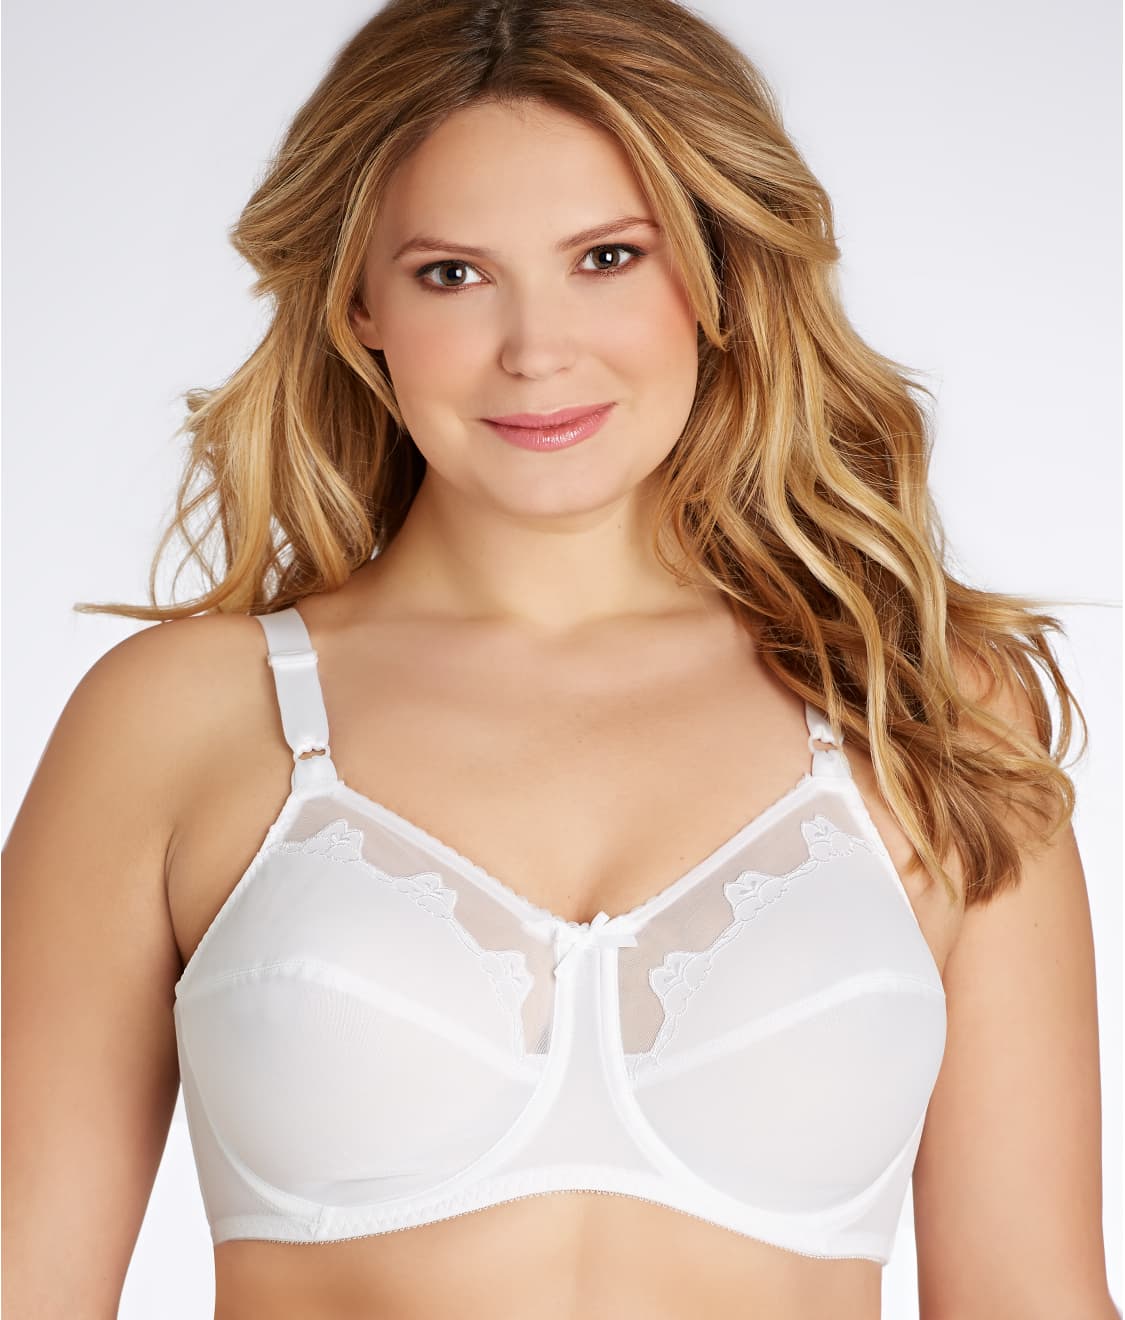 Details about New Bali Bra Style 0180 Size 46D White Full Coverage Underwir...